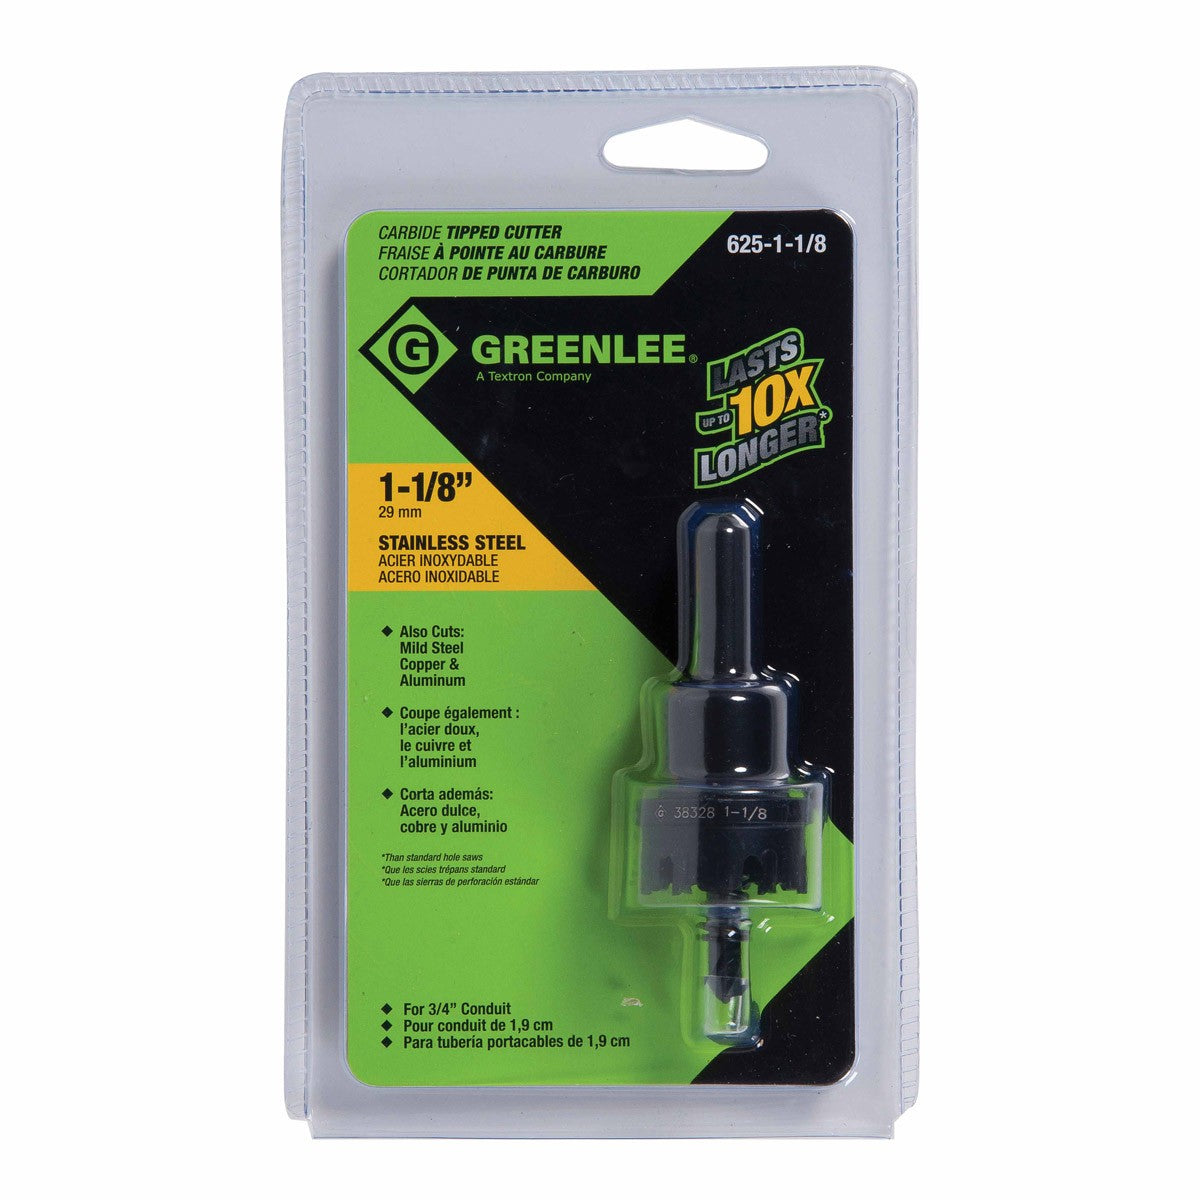 Greenlee 625-1-1/8 1-1/8" Carbide-Tipped Hole Cutter